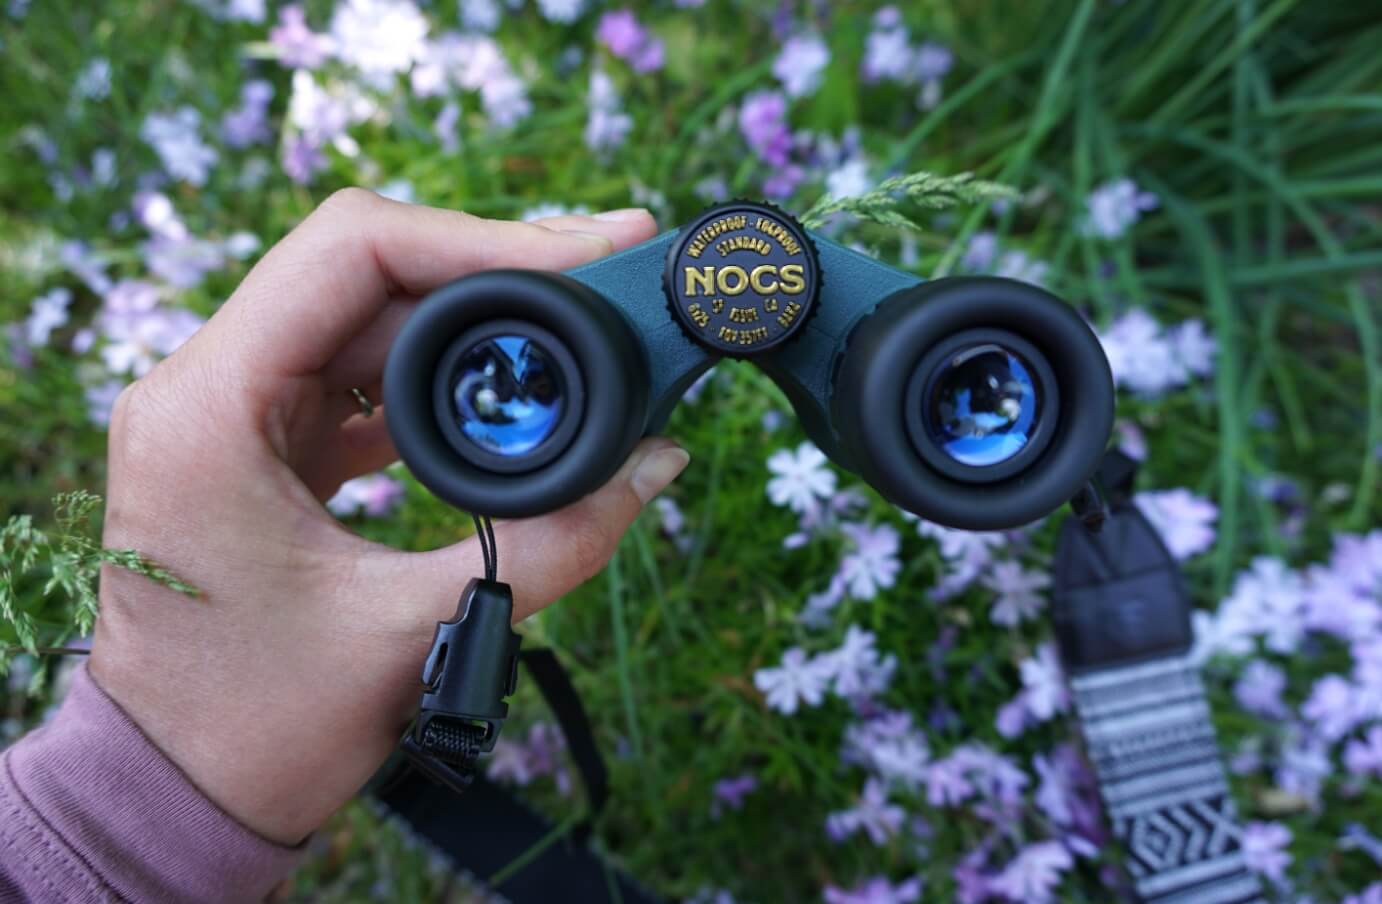 Emily Piper holding a pair of the Cypress green nocs standard issue 8x25 binoculars, looking down towards a green and purple flower bed